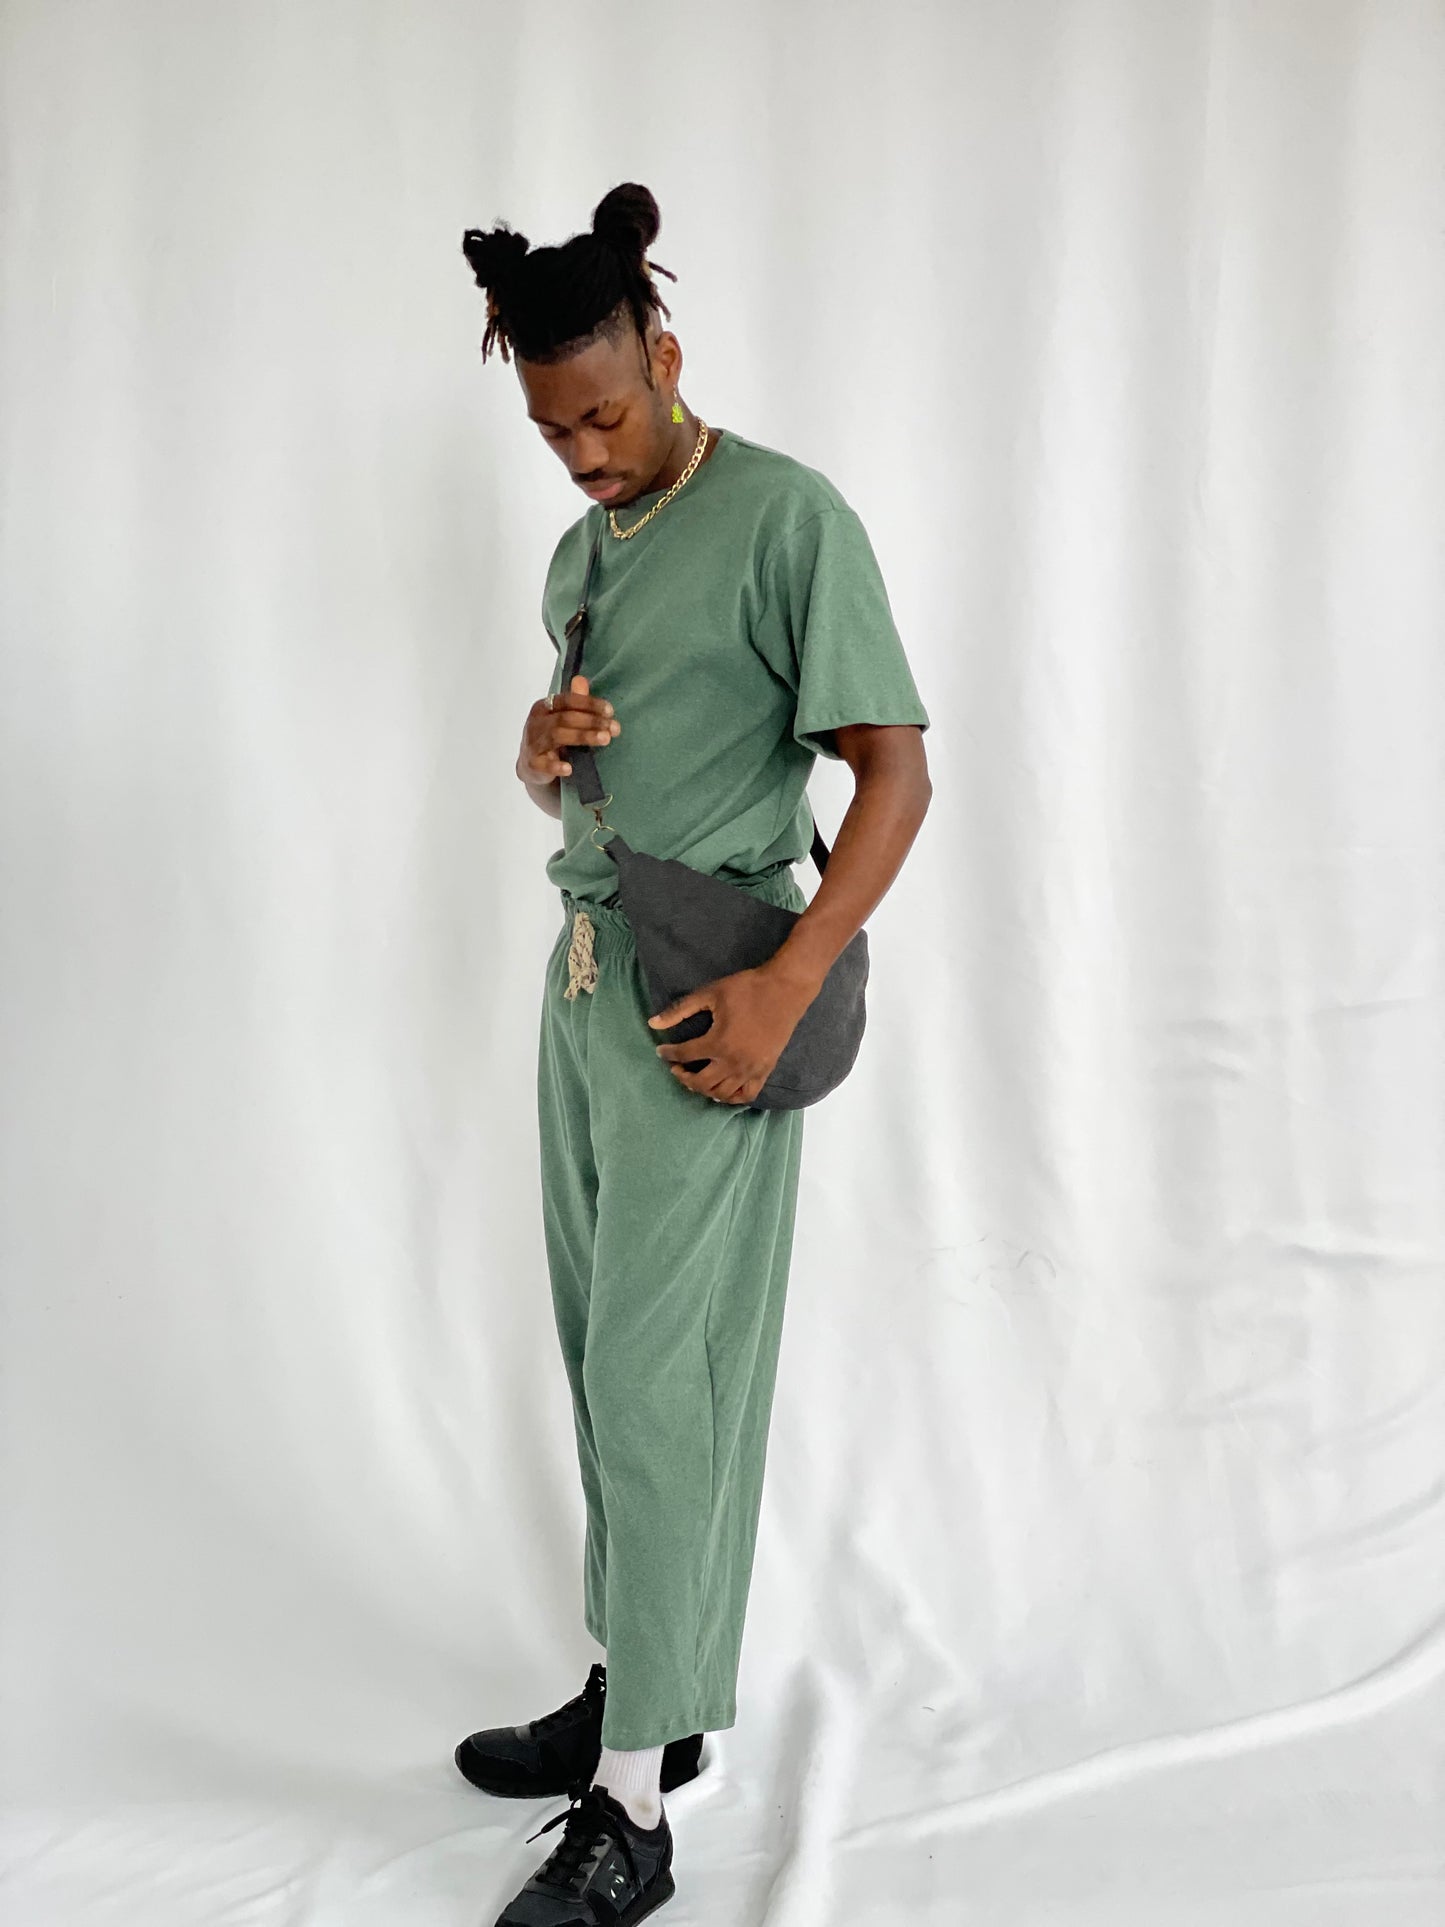 Model wears black sling bag cross body with green pants and t-shirt against a white backdrop 